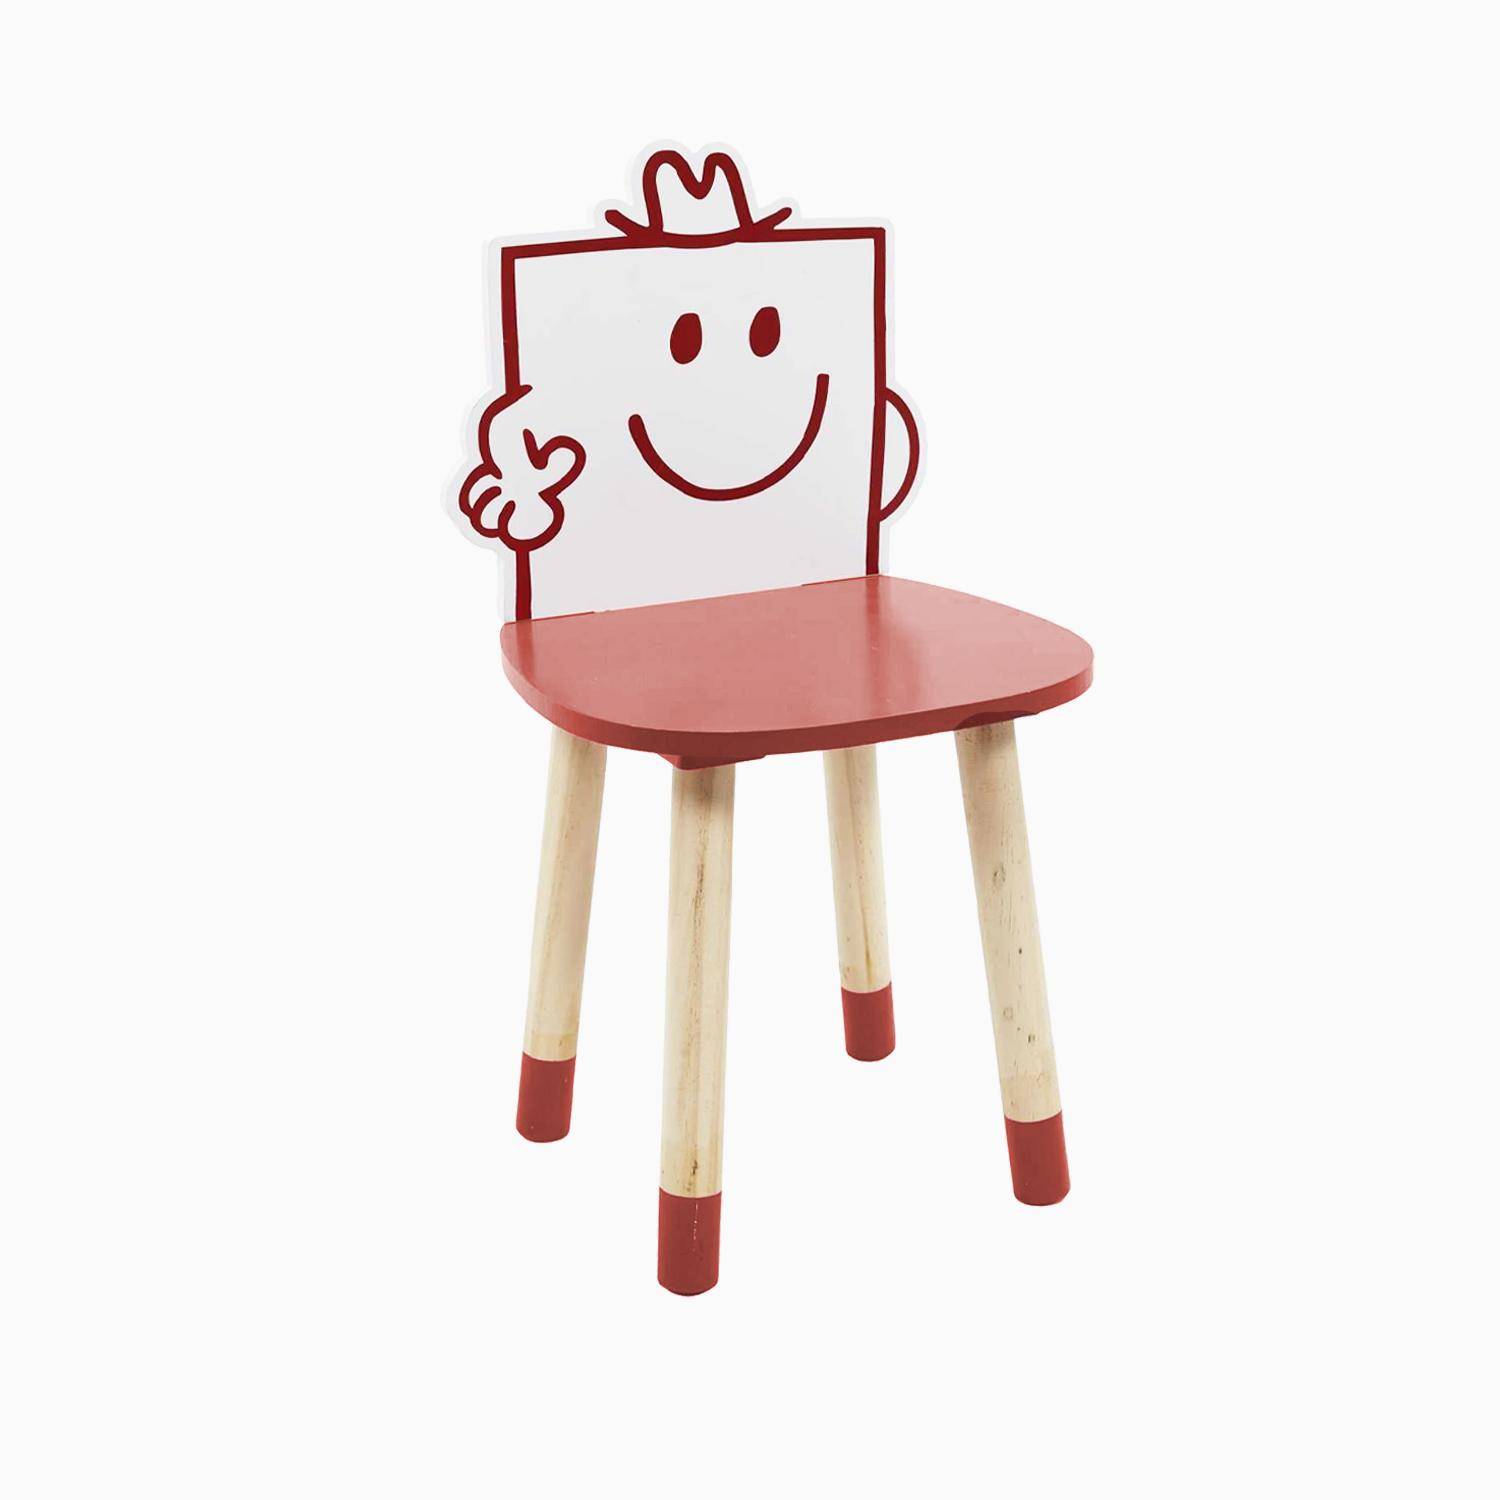 Set of 2 children's chairs, Mr. Men & Little Miss collection - Mr. Strong , Pierre, red,sweeek,Photo4